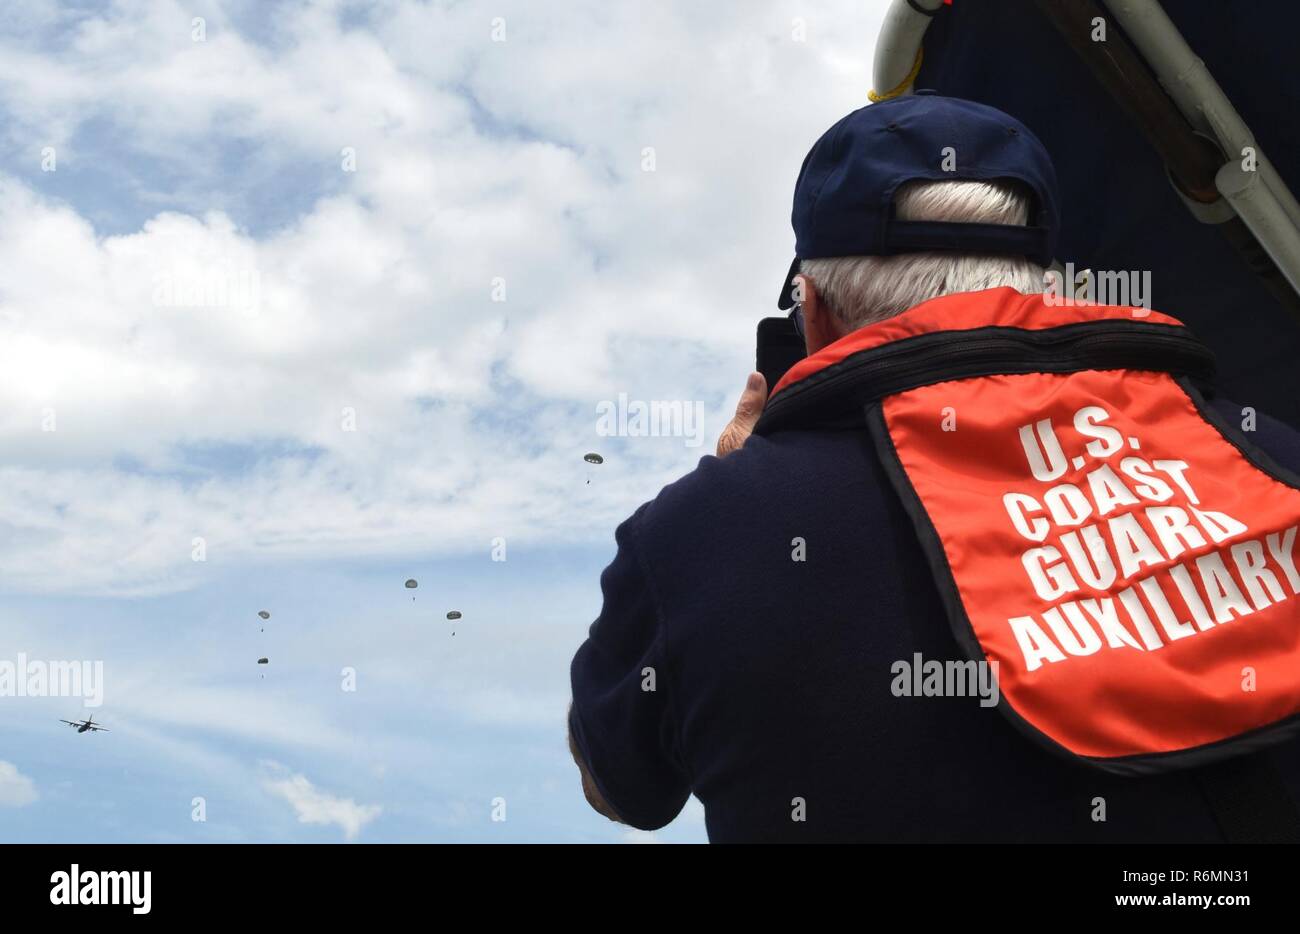 A member of the U.S. Coast Guard Auxiliary watches as members of the 181st Weather Flight parachute out of a C-130 Hercules during a deliberate water drop into Lake Worth in Forth Worth, Texas, May 20, 2017. The Coast Guard Auxiliary provided boat support to aid in parachute and jumper recovery, and provided medevac capabilities if necessary. (Texas Air National Guard Stock Photo